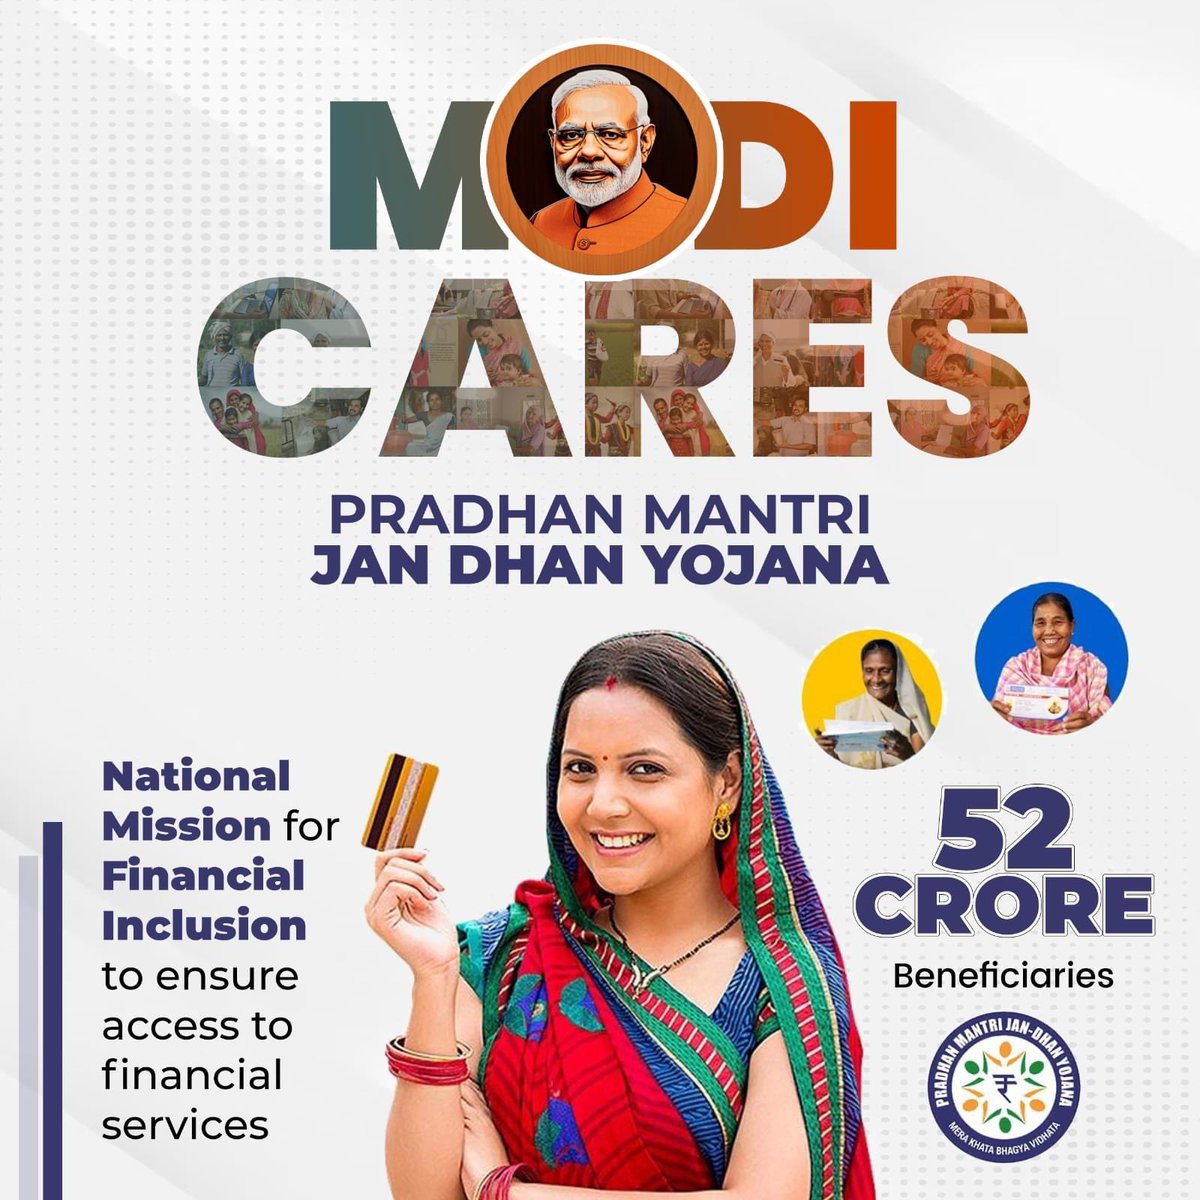 A leader who prioritizes the needs of the underprivileged. #Modi 

A huge number of Indians didn't have bank accounts before 2014, depriving them of the benefits of the welfare schemes. PMJDY proved to be a game-changer in financial inclusion. 
#PhirEkBaarModiSarkaar